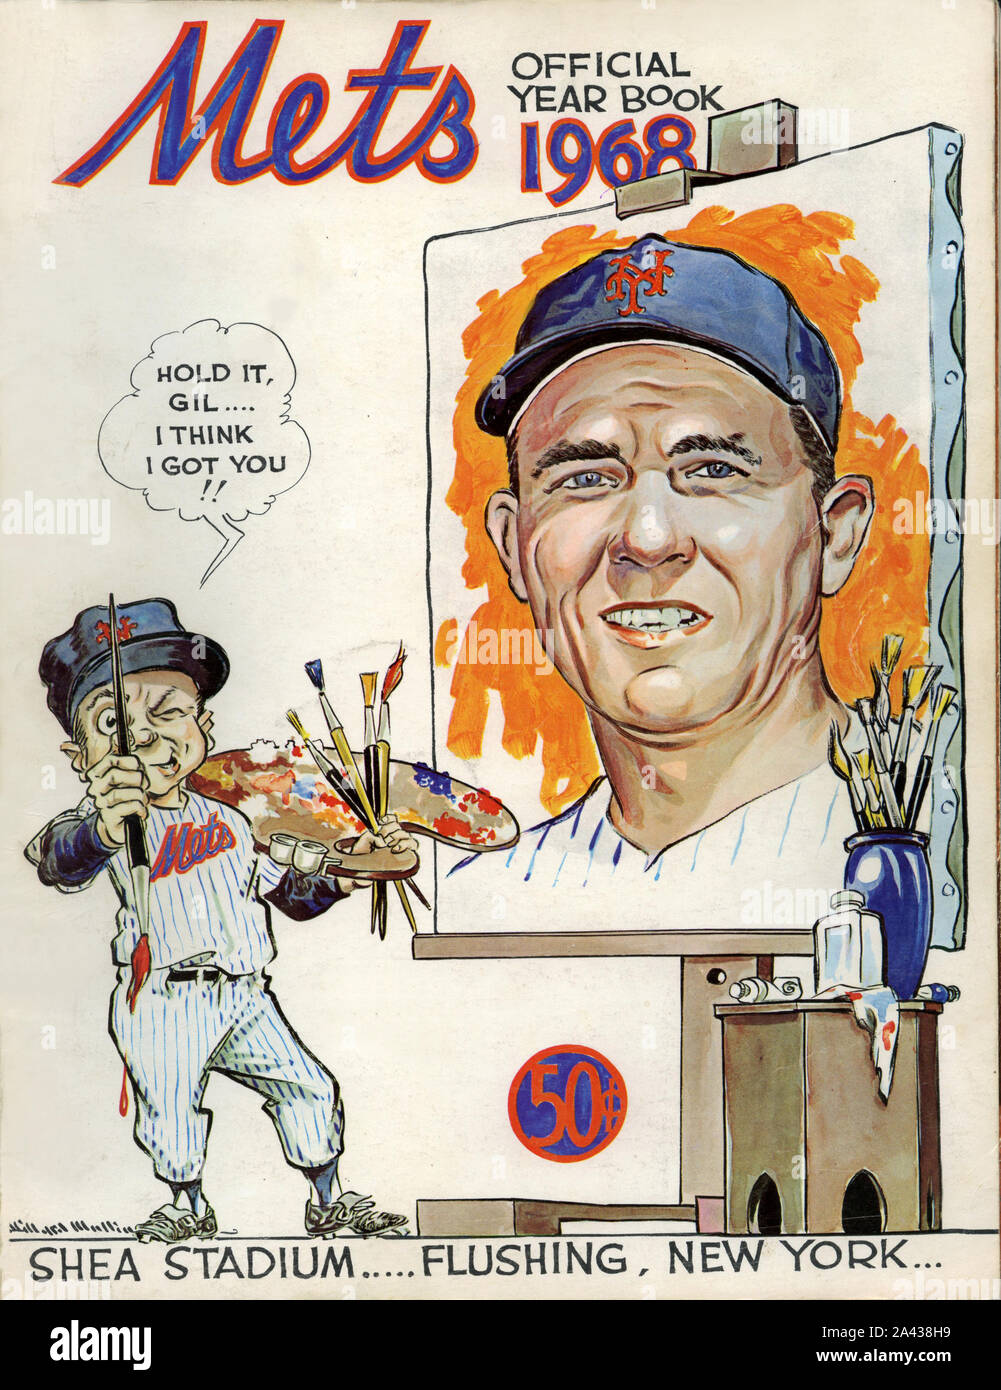 Vintage 1968 New York Mets baseball year book cover featuring manager Gil Hodges. Stock Photo